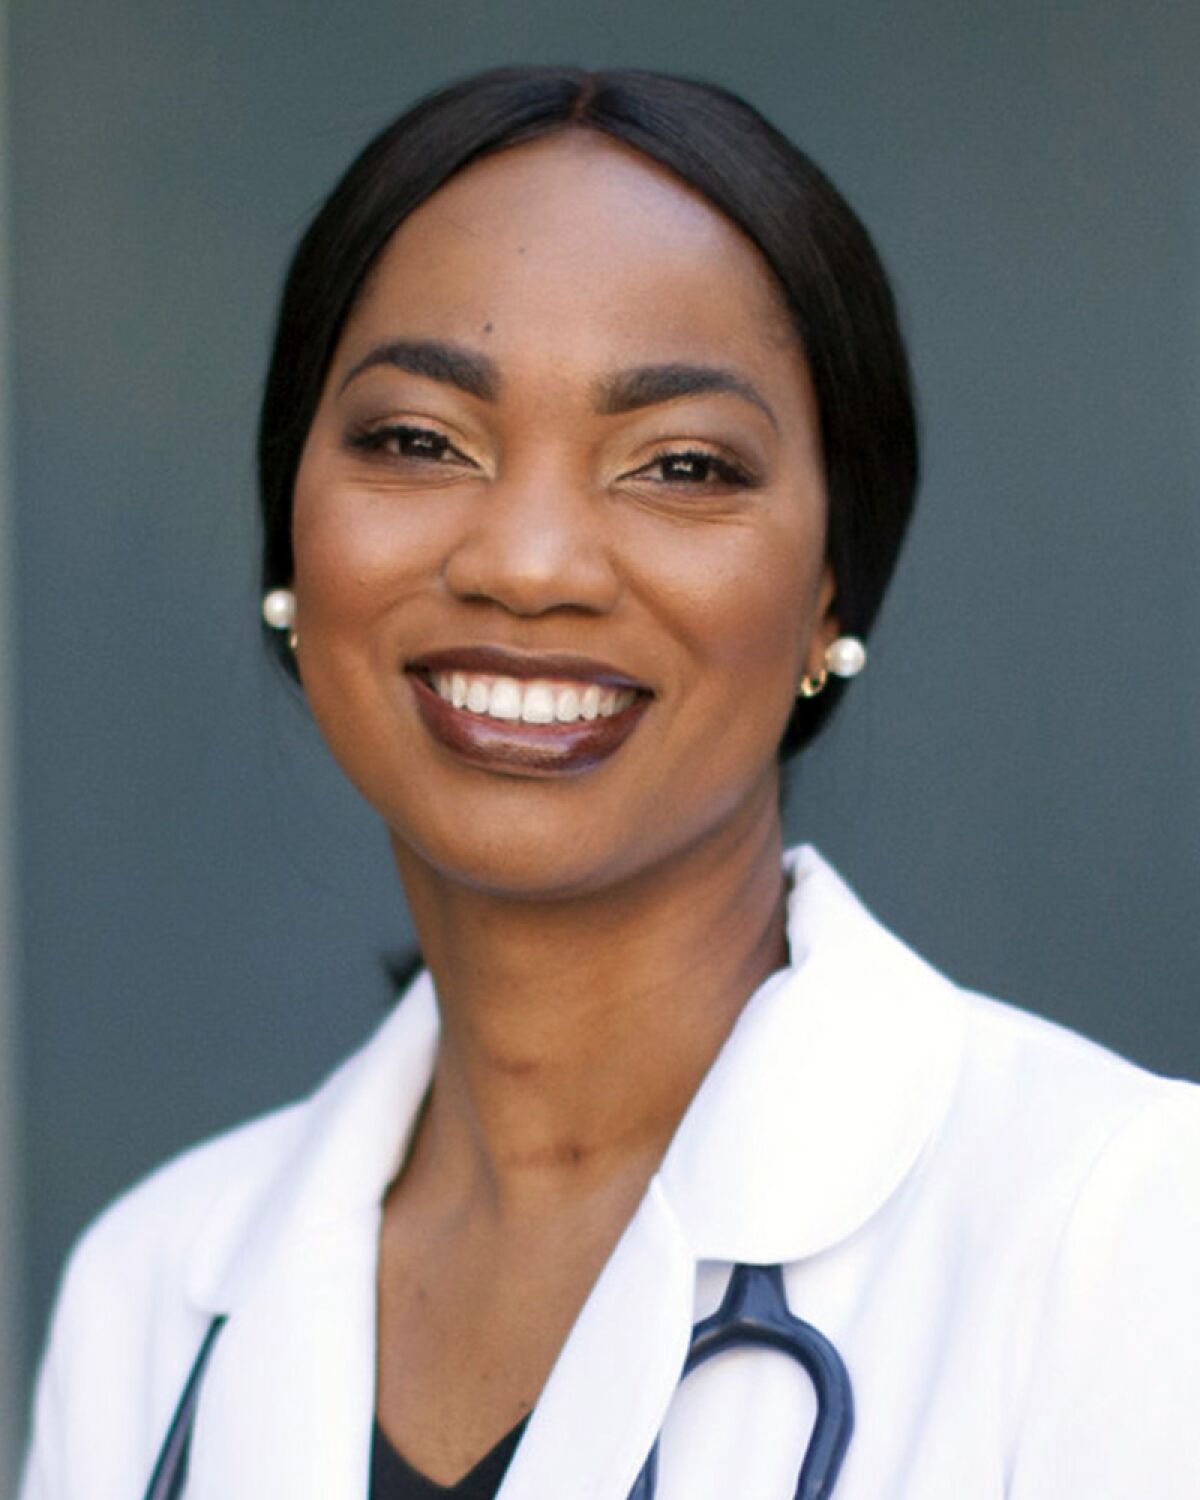 Dr. Akilah Weber raised more than $350,000 for her 75th Assembly race, much more than four other candidates